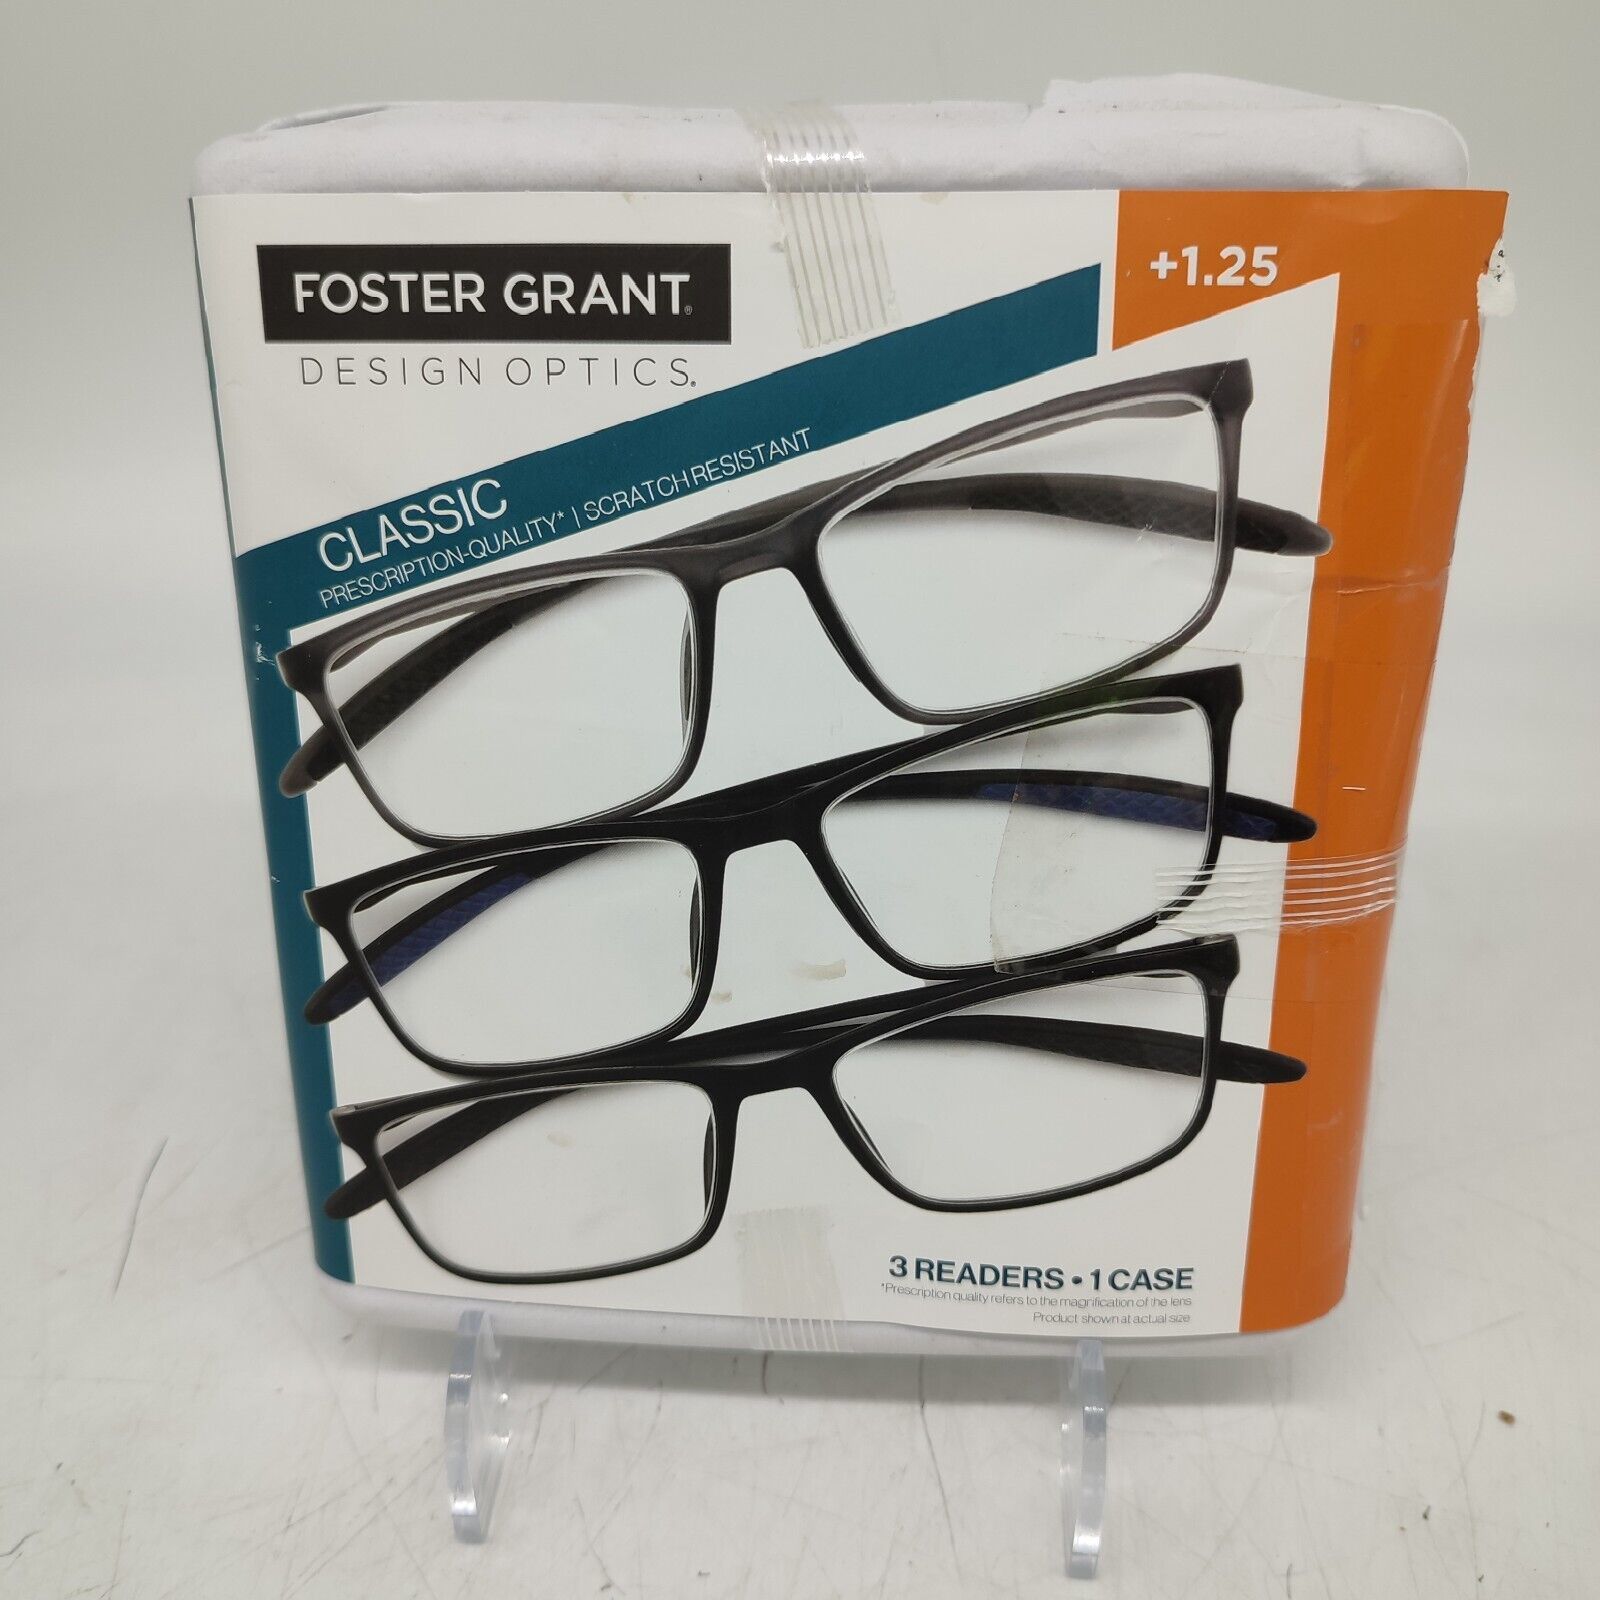 Design Optics Foster Grant 3 Pack of Readers-Classic Frames w/Carry Case +1.25